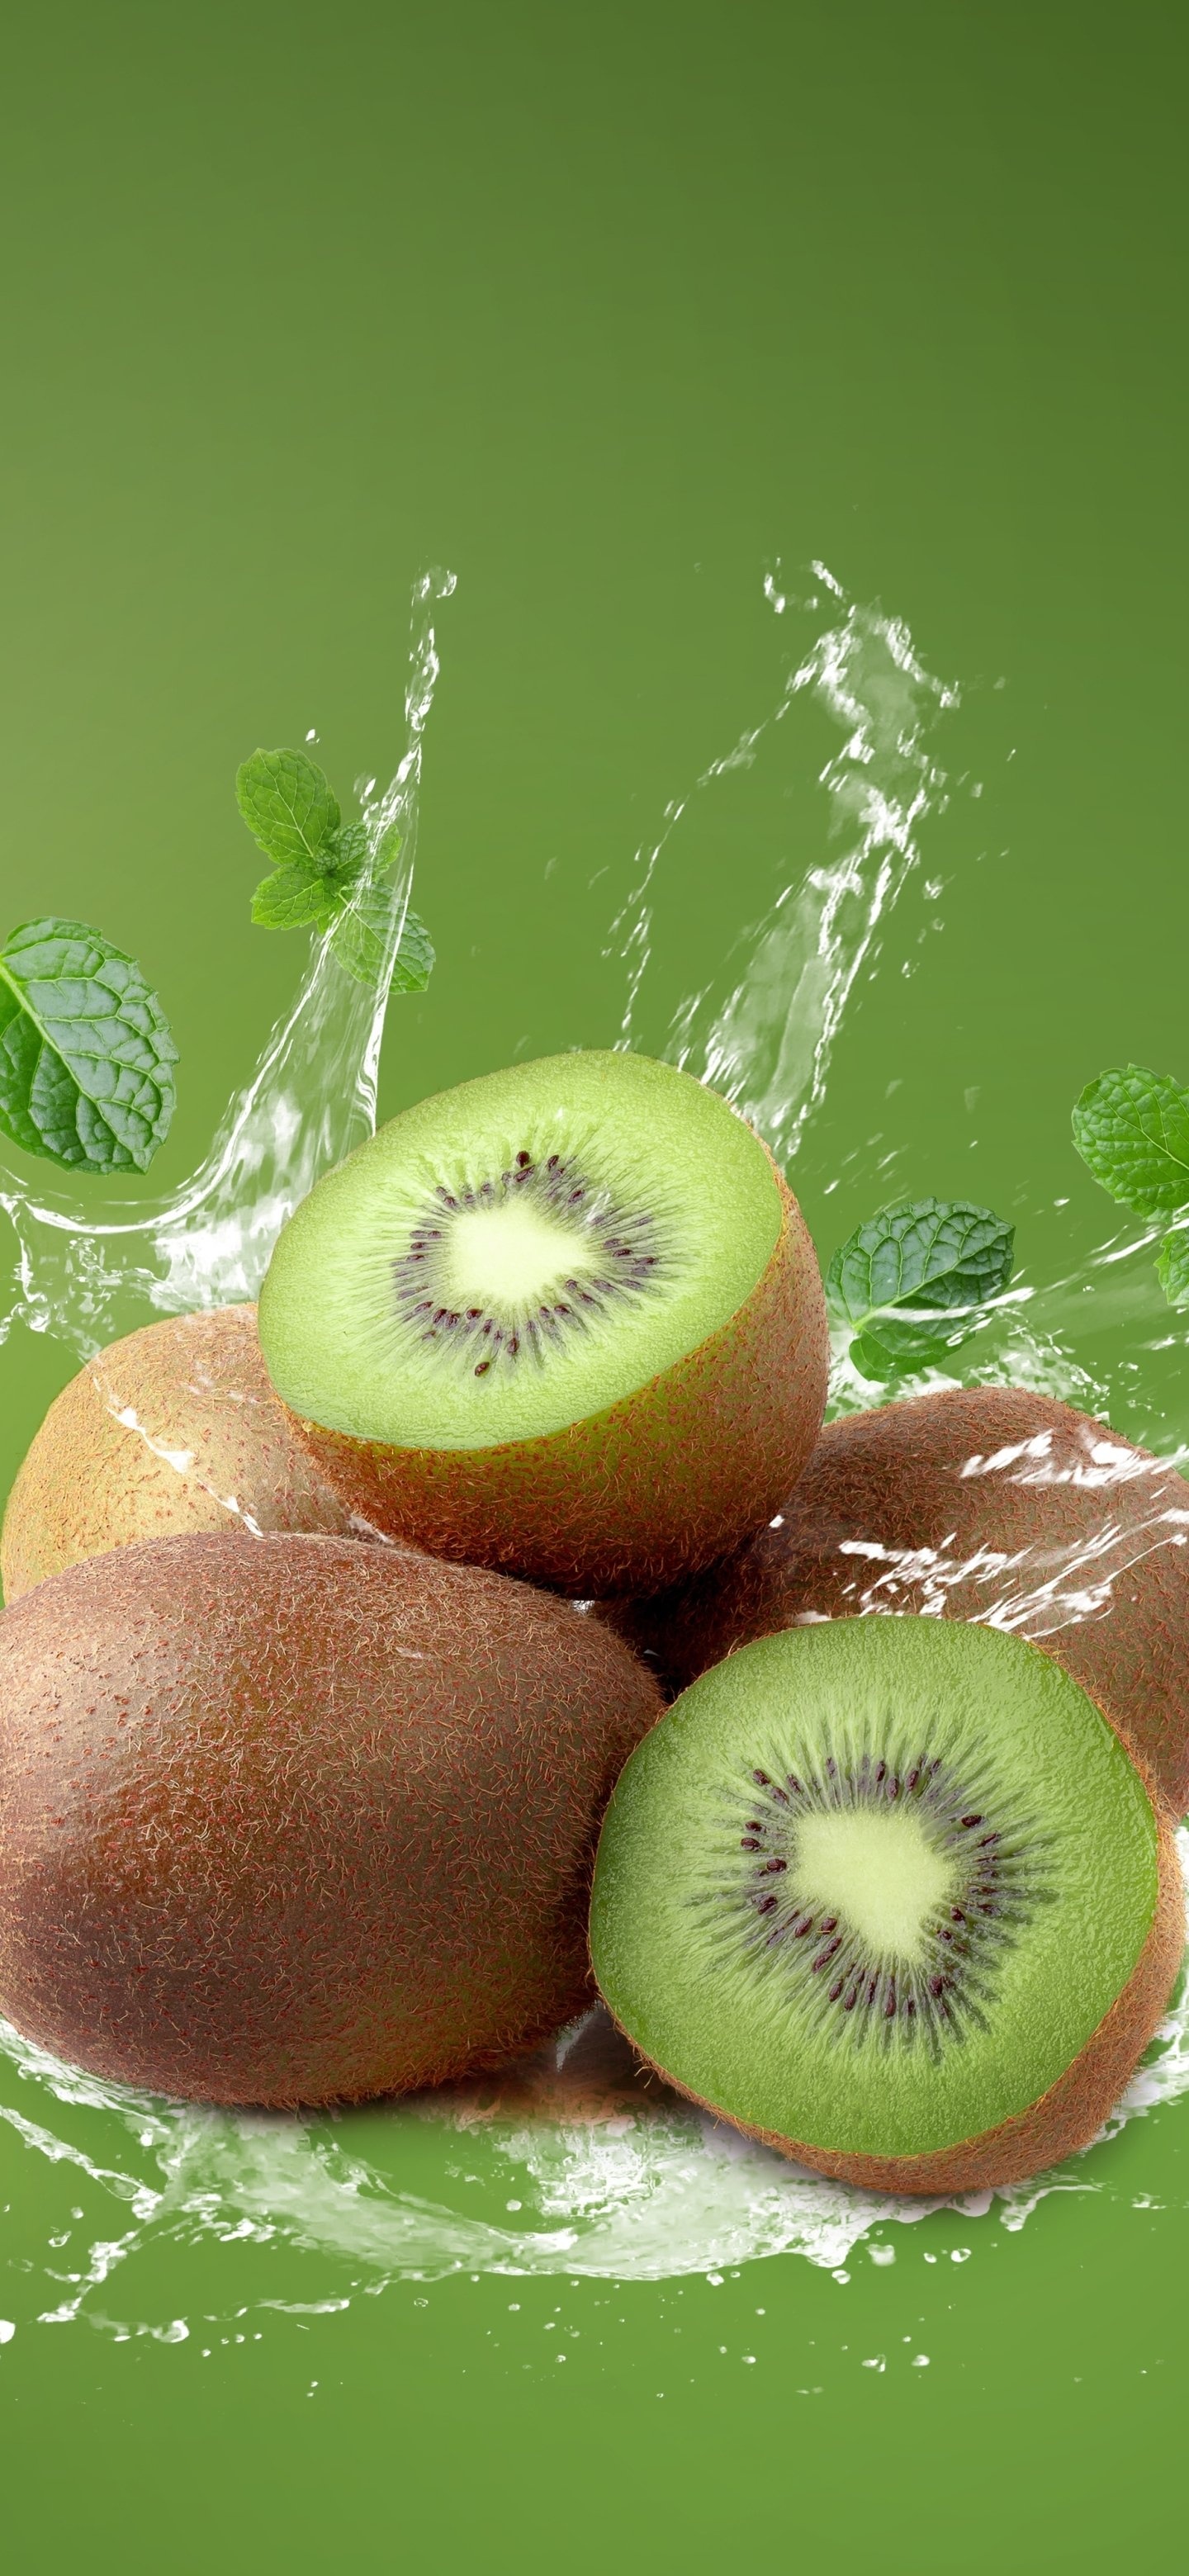 Food kiwi, Nutritious snack, Natural source, Tropical flavor, 1440x3120 HD Handy